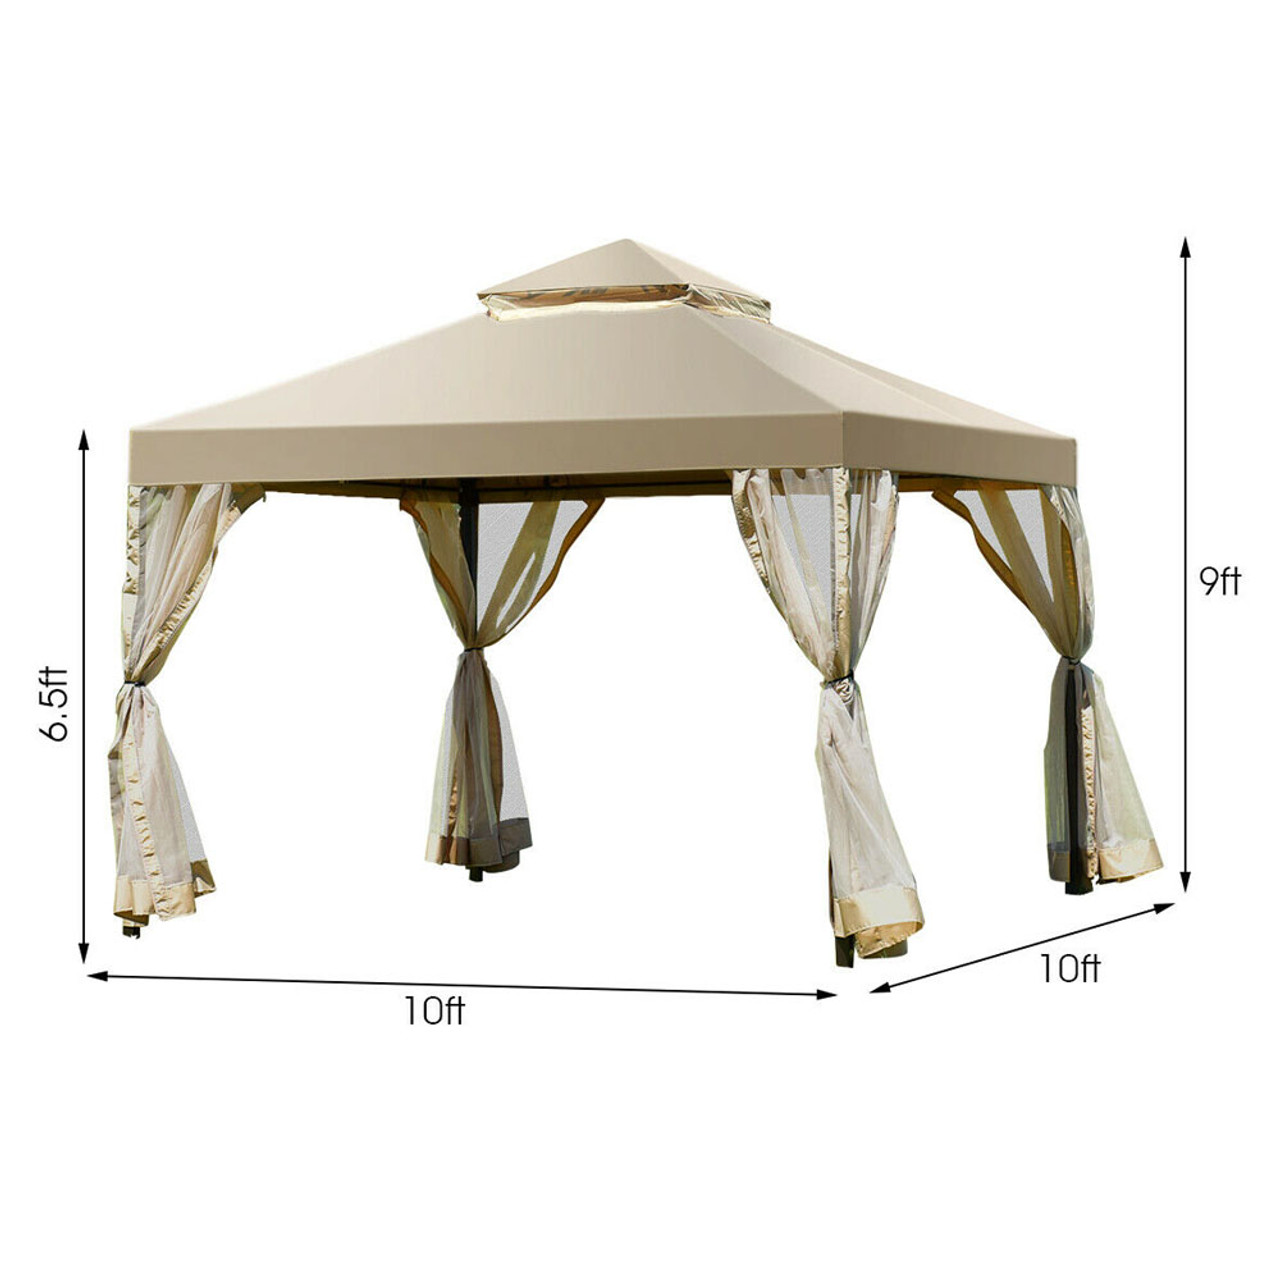 10' x 10' 2-Tier Outdoor Fully-Enclosed Gazebo product image